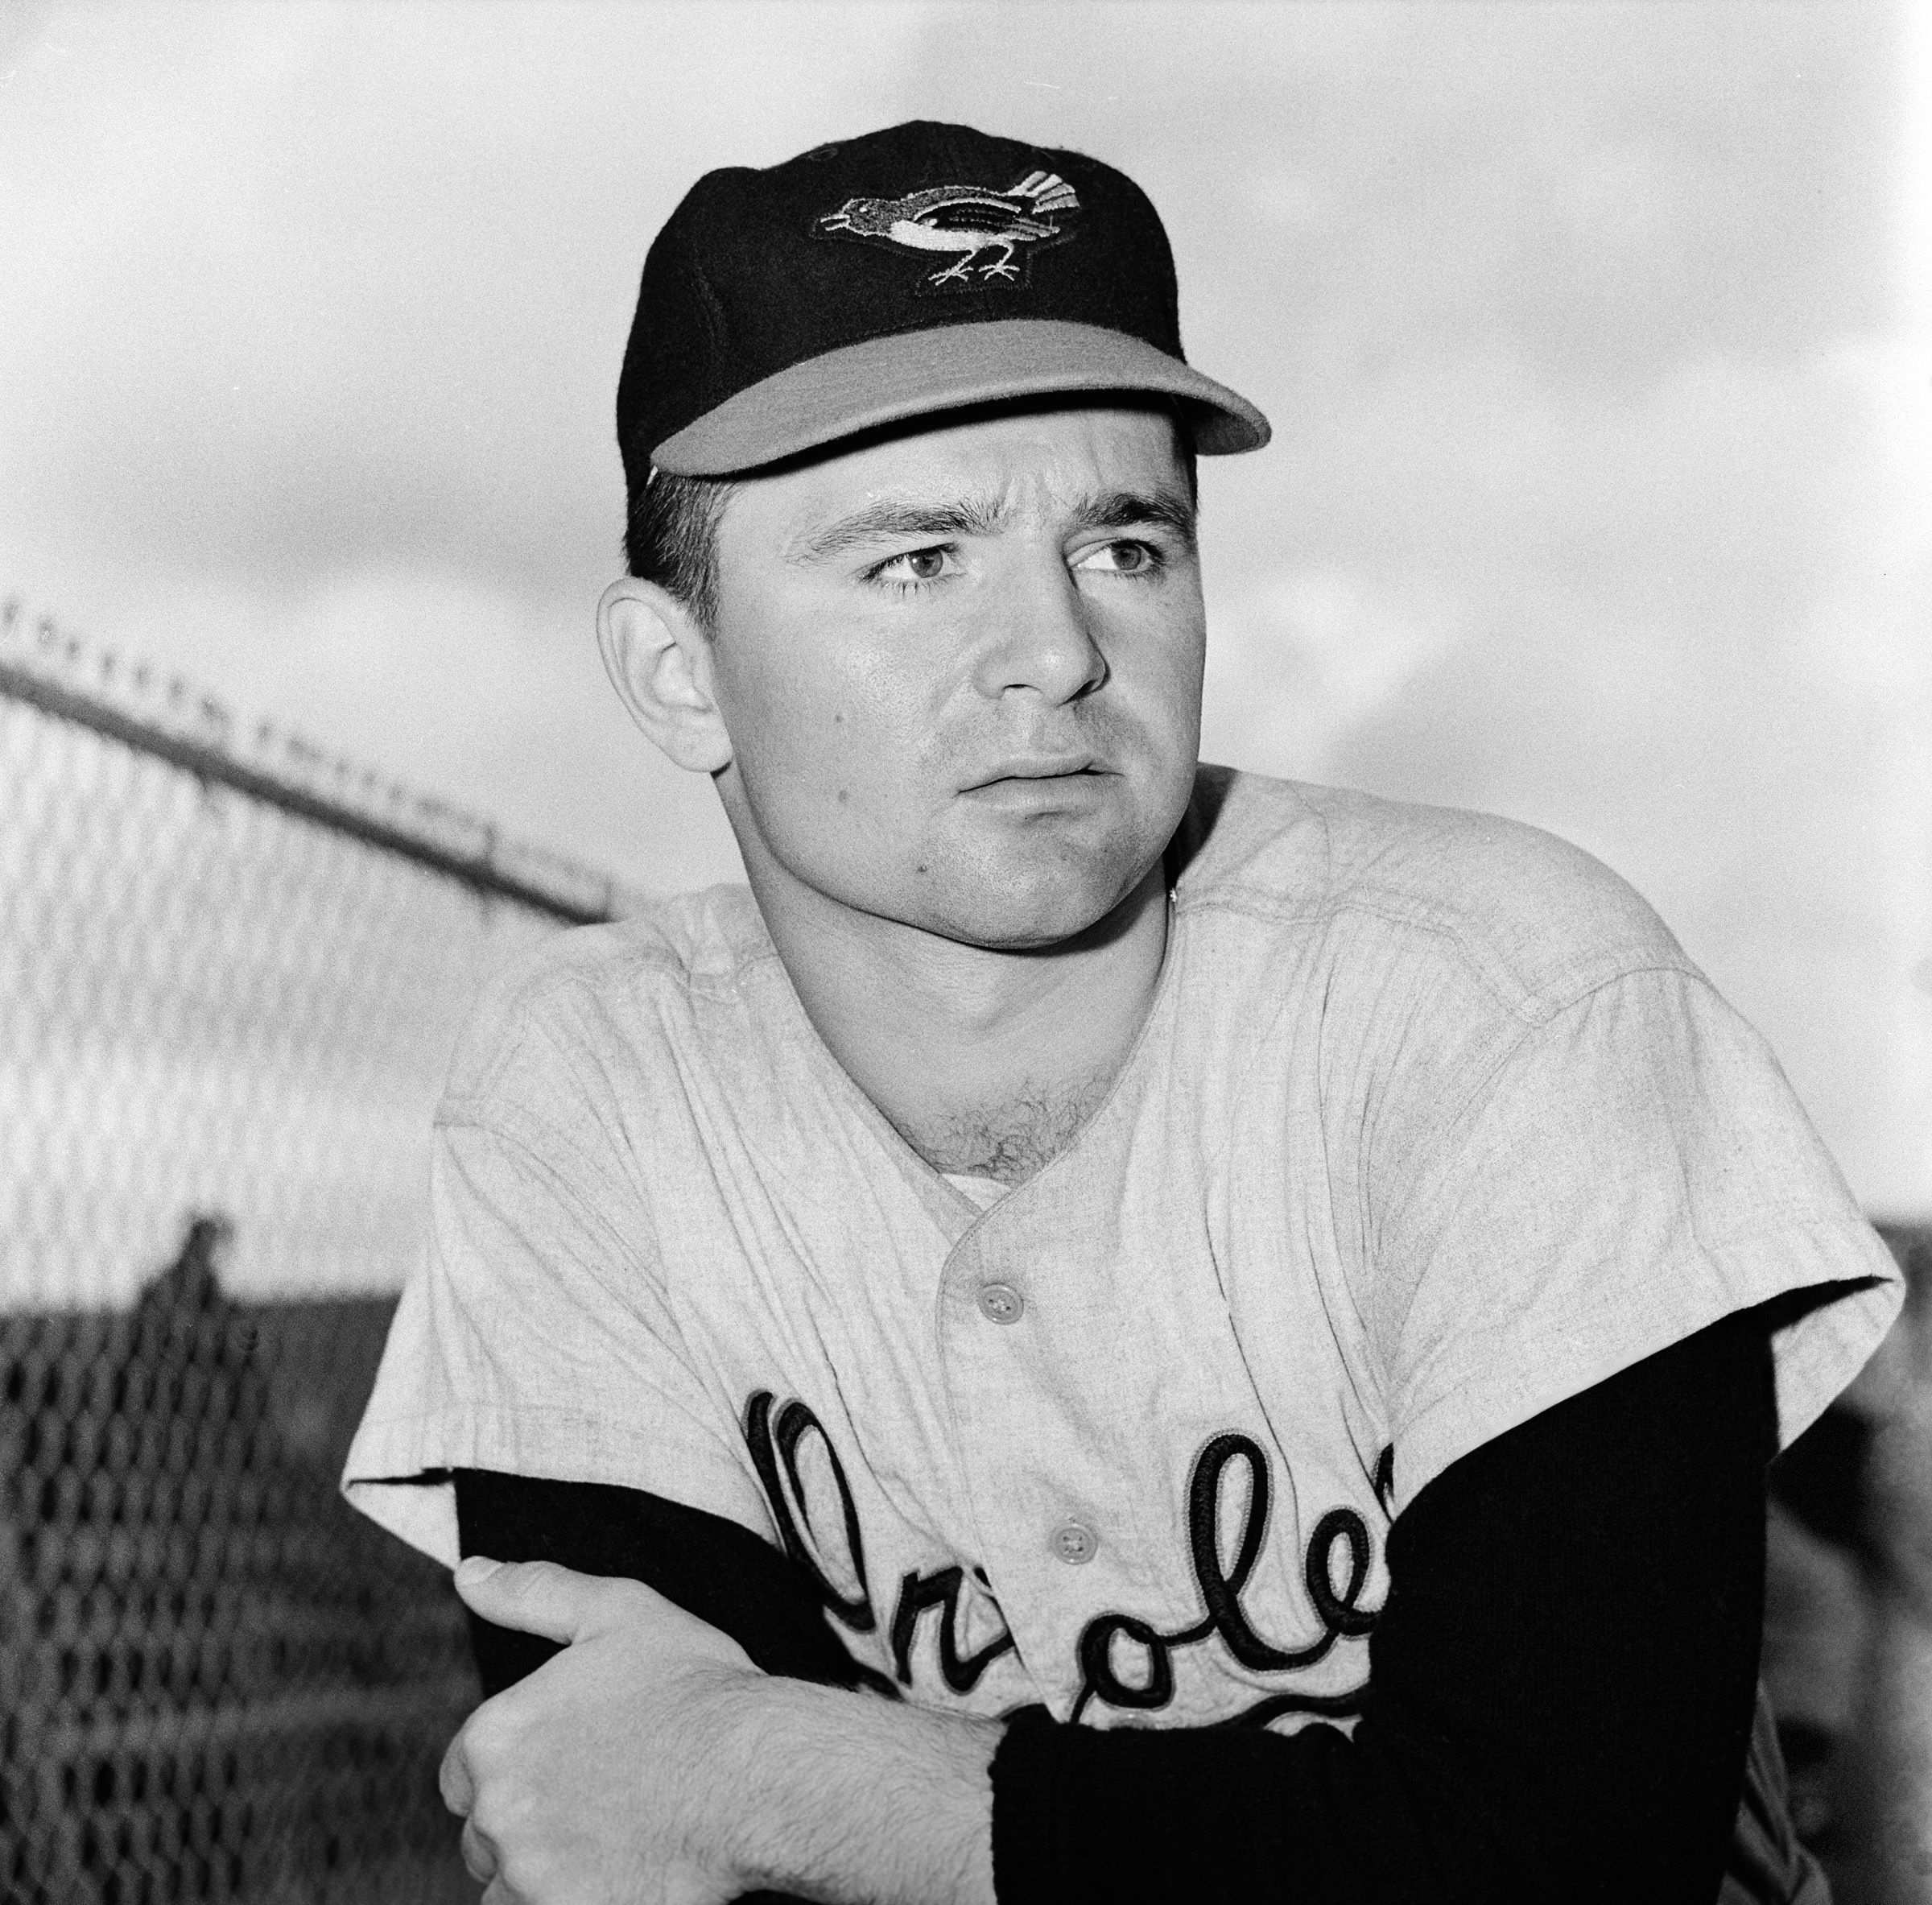 <p>Steve Dalkowski, the wild and hard-throwing left-handed minor league pitcher who inspired the character Nuke LaLoosh in the movie "Bull Durham" -- but never pitched in a big league game -- died on April 19, 2020, at the Hospital of Central Connecticut in New Britain, Connecticut, due to complications of COVID-19. His sister said he had several pre-existing conditions that led to his death. The former athlete -- who was 80 when he passed away -- had been in an assisted living facility for 26 years due to alcoholic dementia.</p>